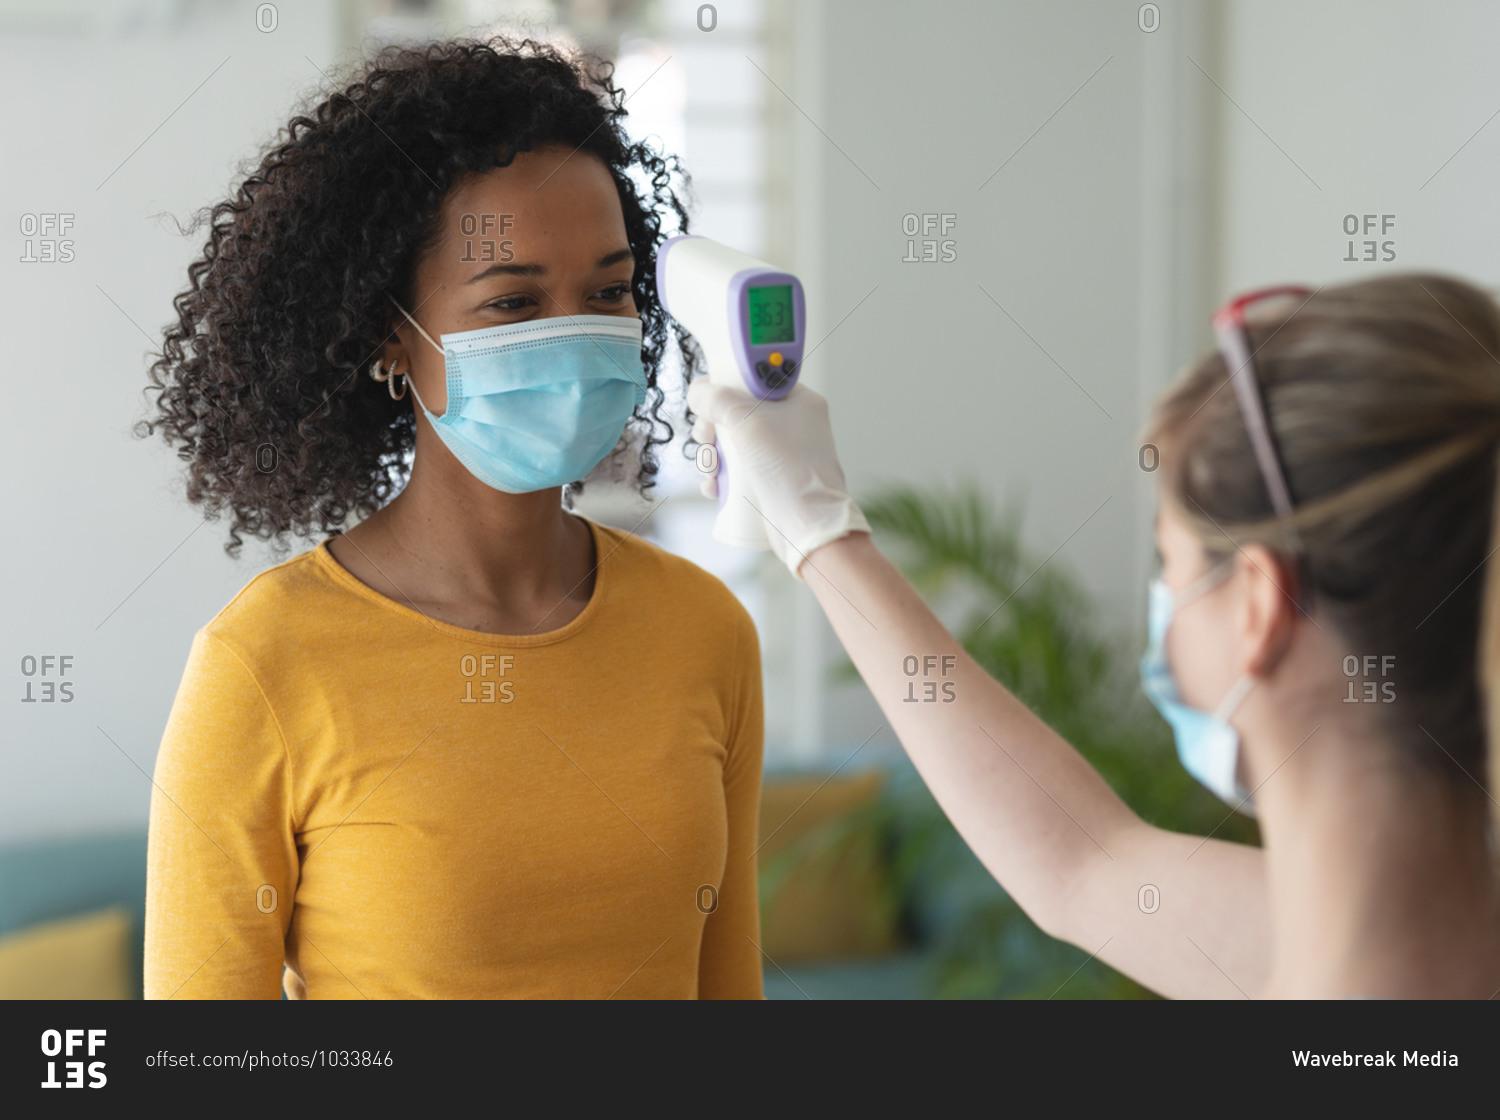 Caucasian woman using digital thermometer taking temperature of mixed race woman arriving at work wearing face mask. Health and hygiene in workplace during Coronavirus Covid 19 pandemic.